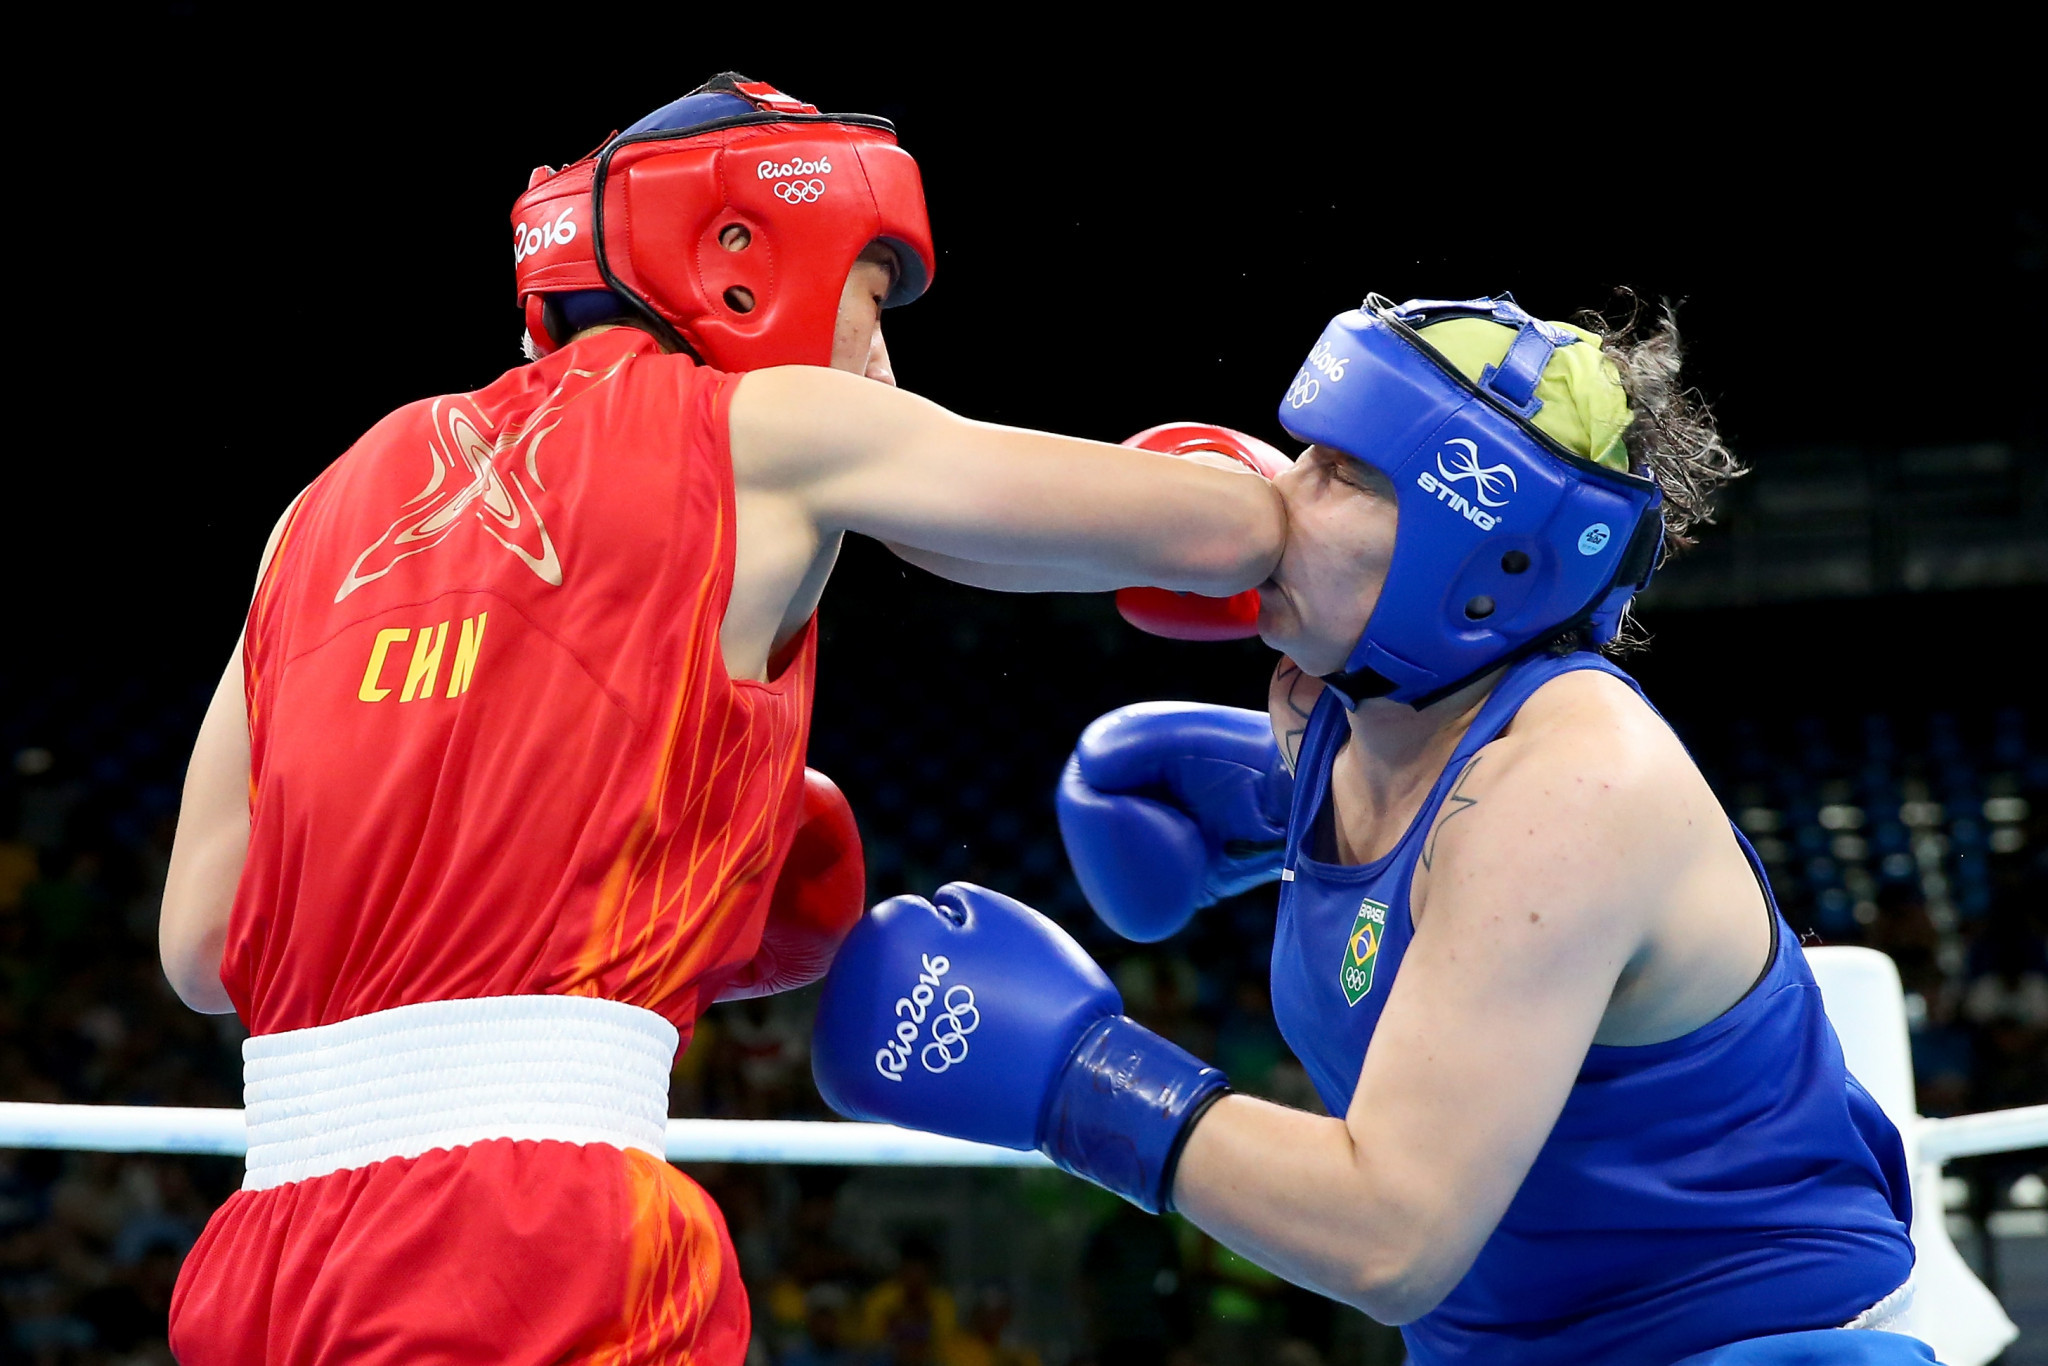 The boxing event at Tokyo 2020 will be held without the involvement of AIBA ©Getty Images